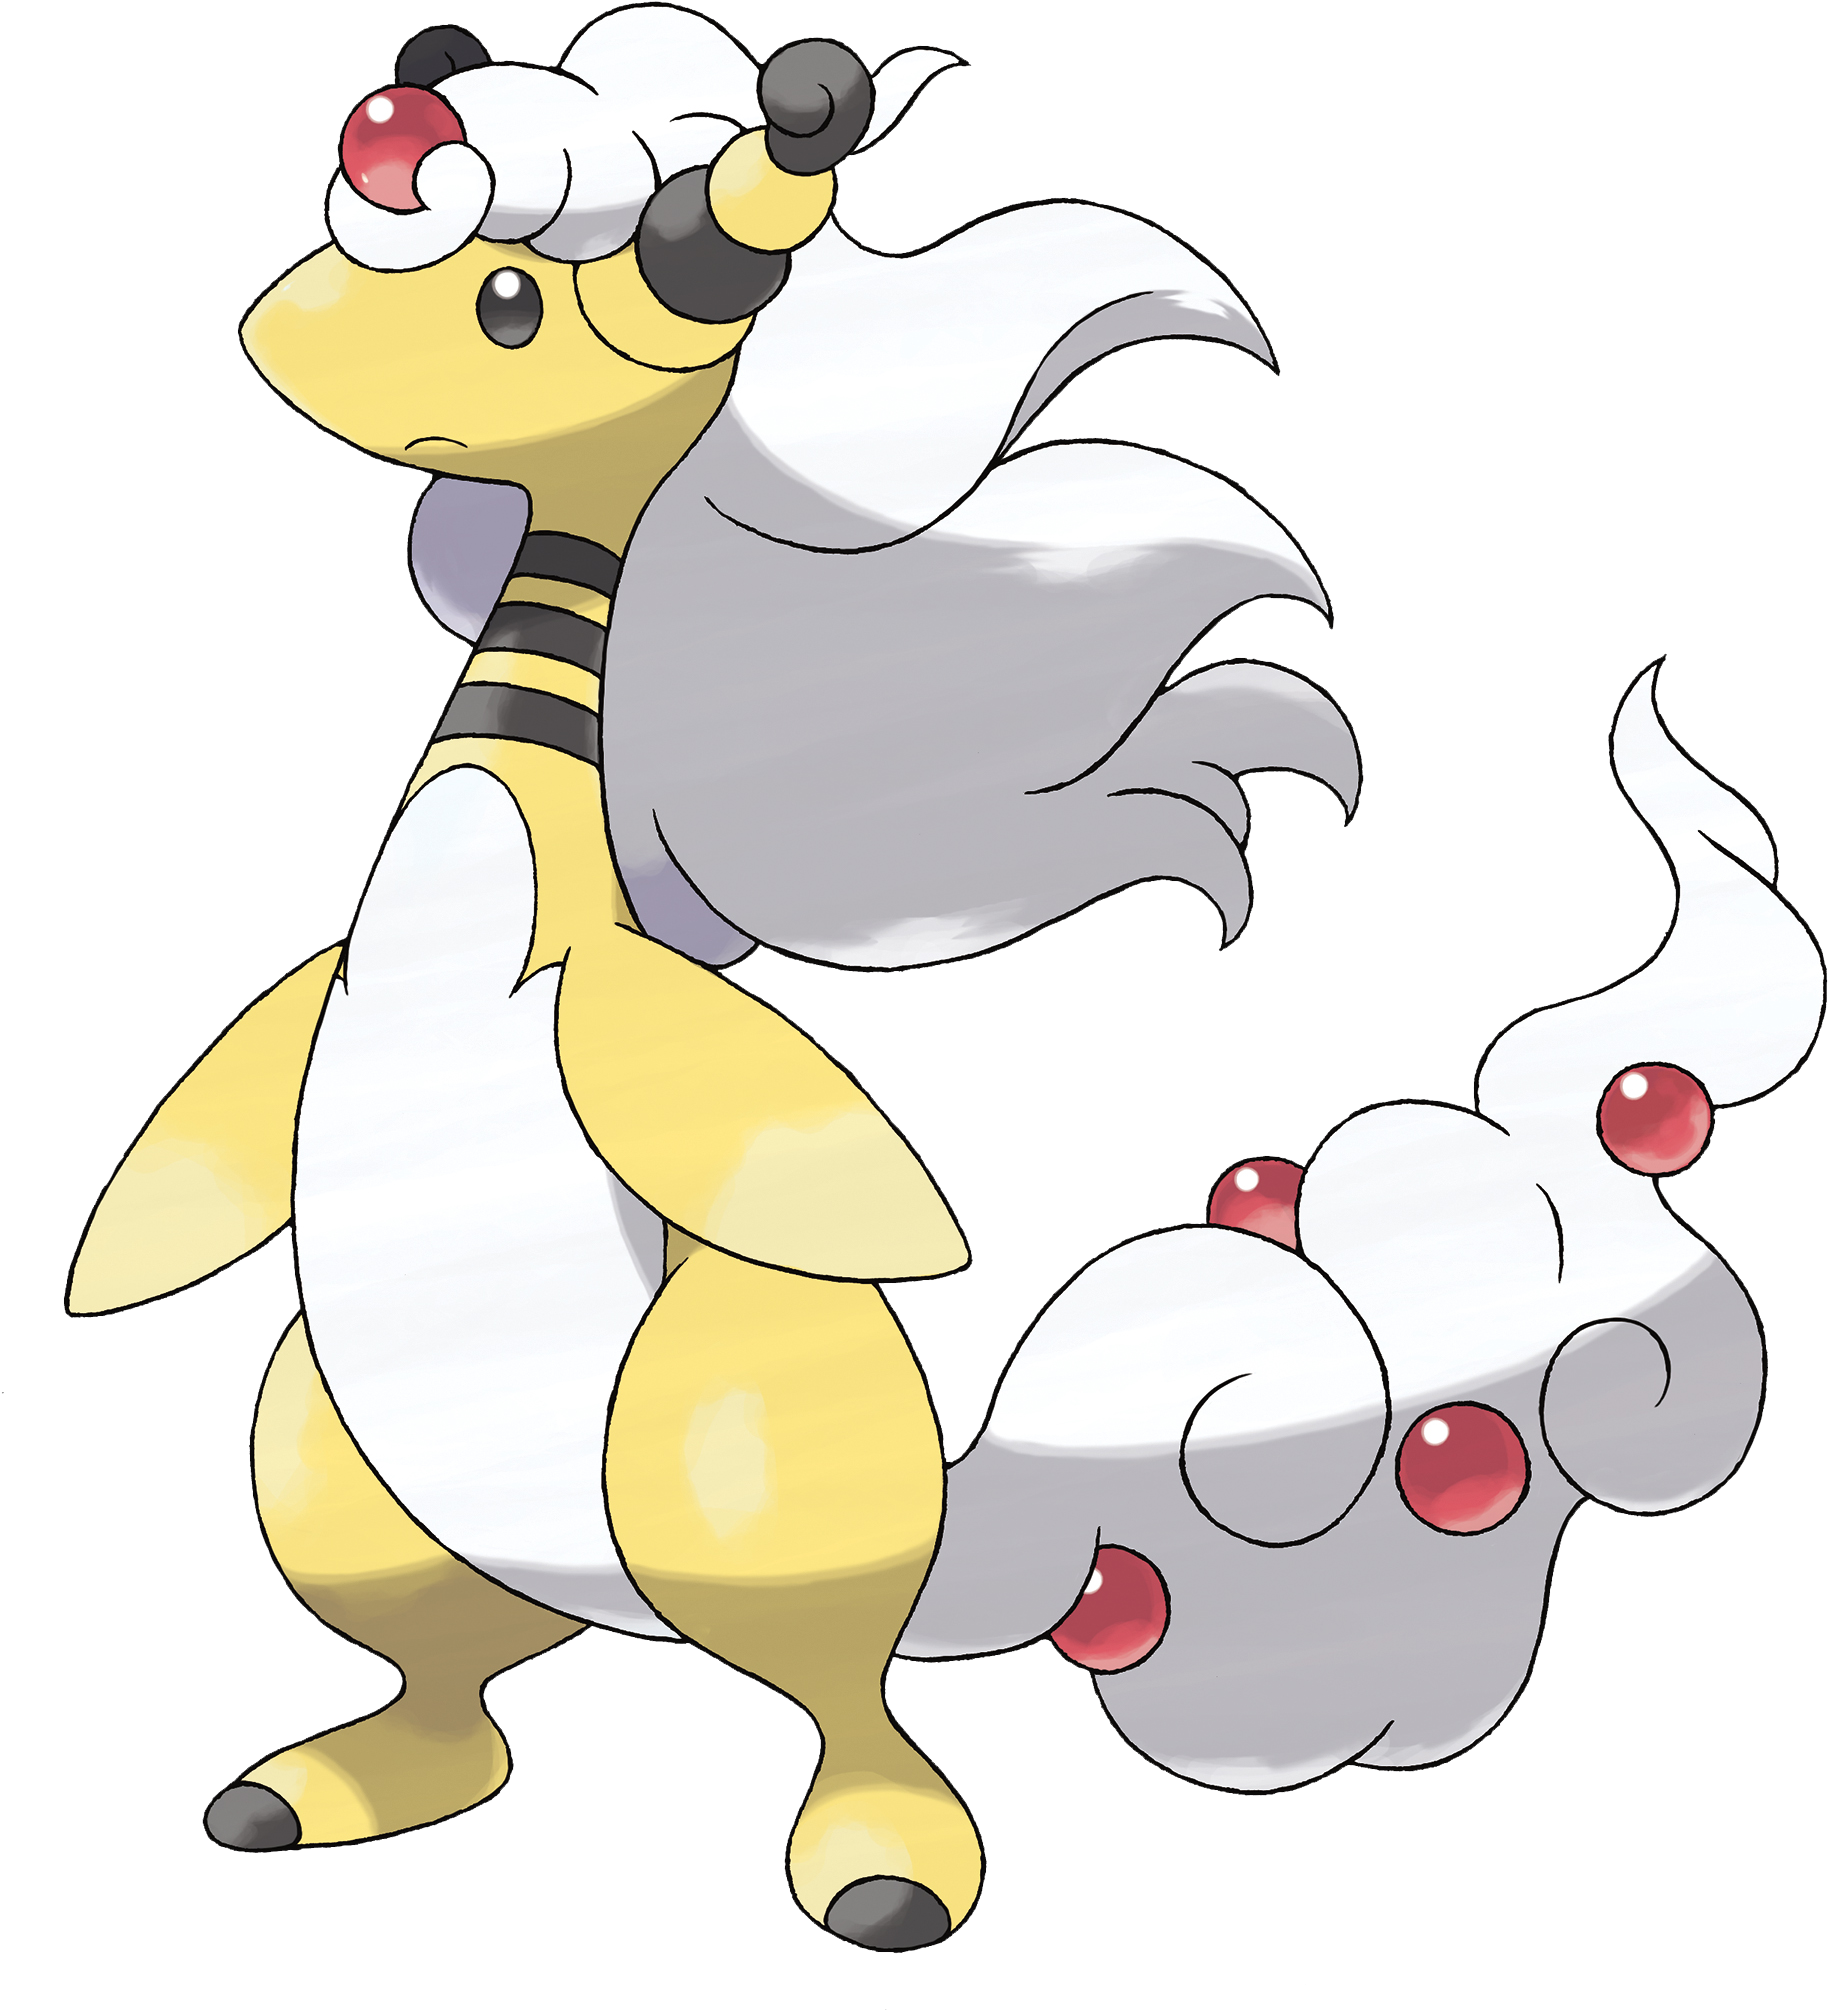 Yet Throwing A Wig On Ampharos And Calling It A Dragon - Pokemon Mega Evolution Ampharos (1890x2073)